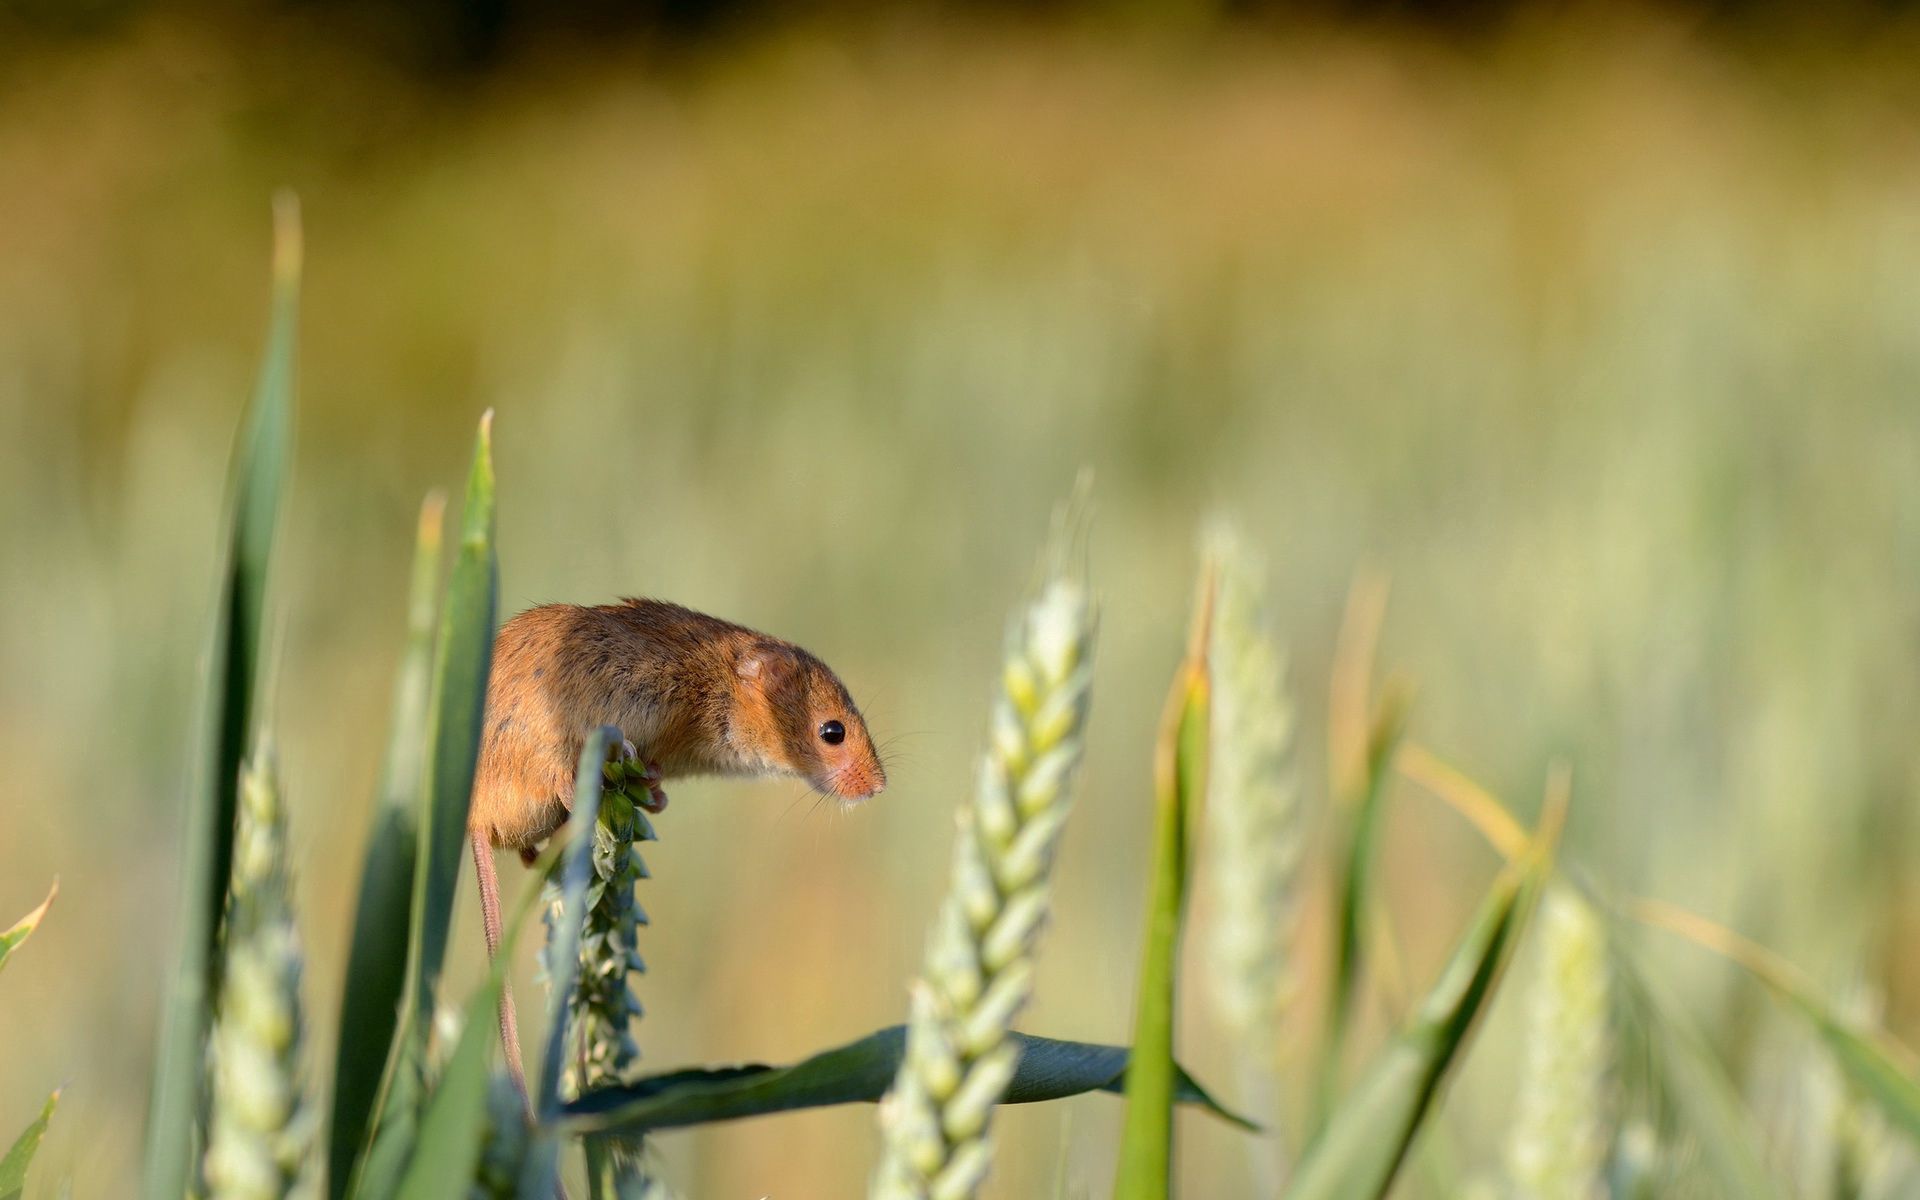 animals, grass, rodent, ear, harvest mouse, field mouse